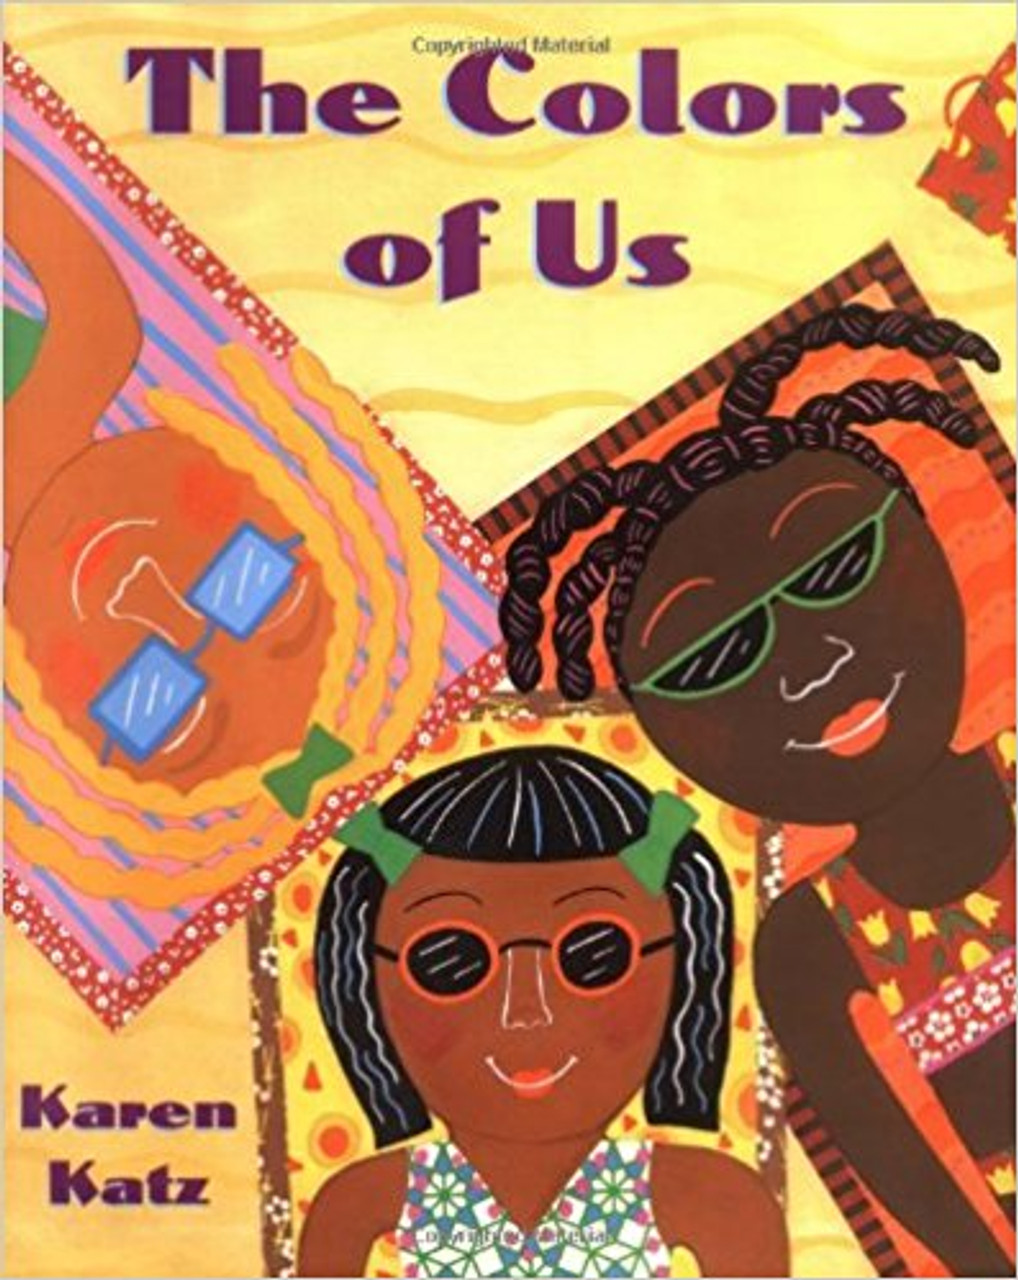 Seven-year-old Lena is going to paint a picture of herself.  She wants to use brown paint for her skin, and learns that brown comes in many different shades.  Through the eyes of a little girl who begins to see her world in a new way, this book celebrates the differences and similarities that connect all people.